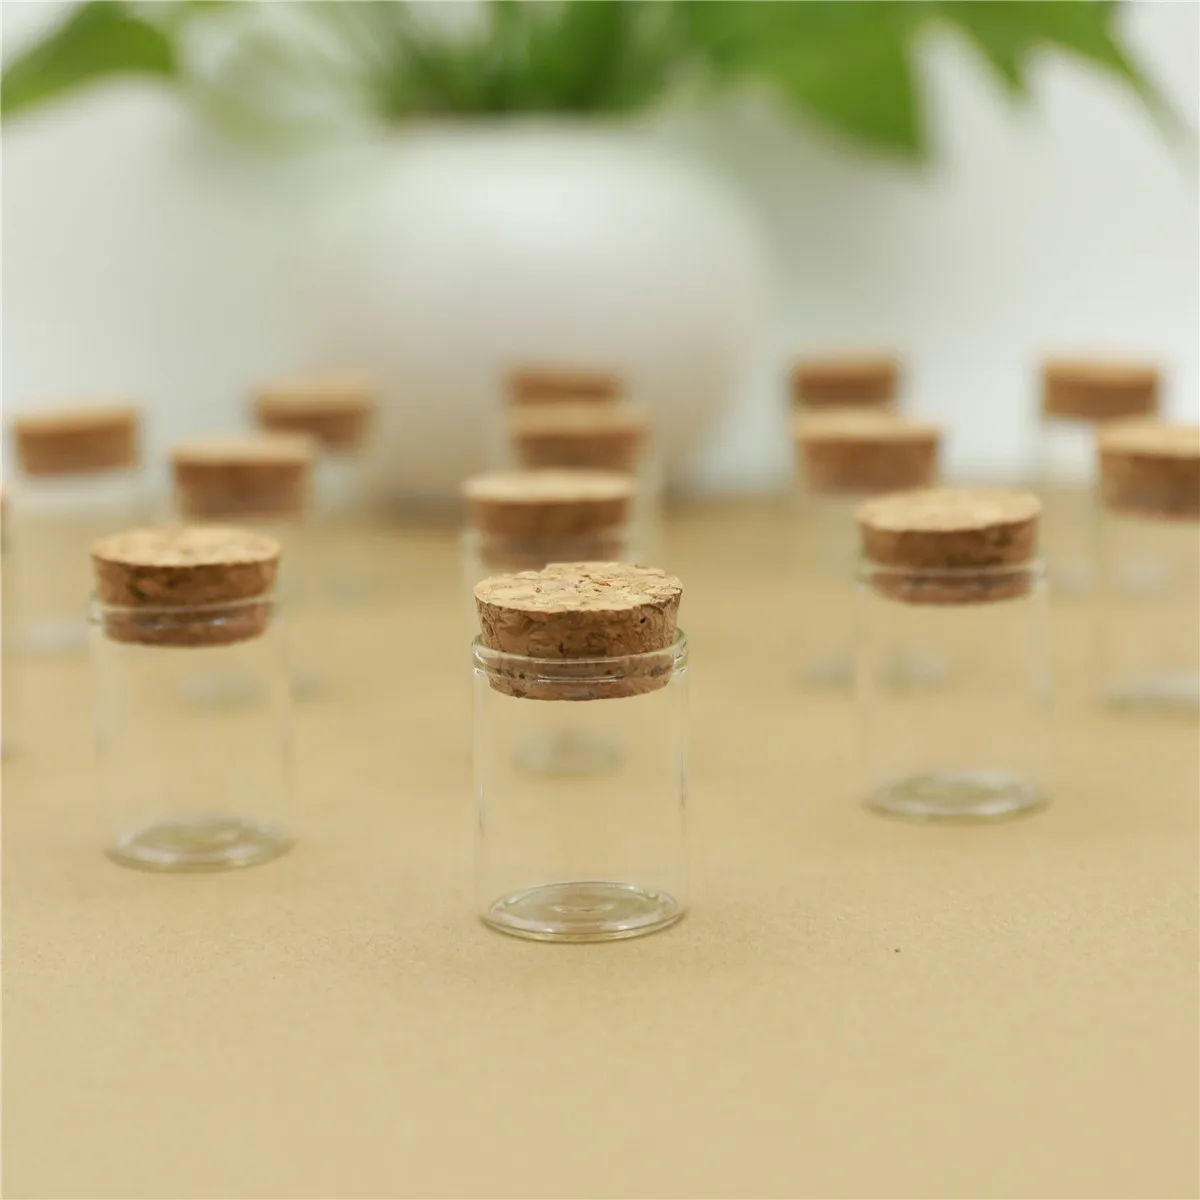 

24pcs 15ml size 30*40mm Test Tube with Cork Stopper Spice Bottles Container Jars Vials DIY Craft